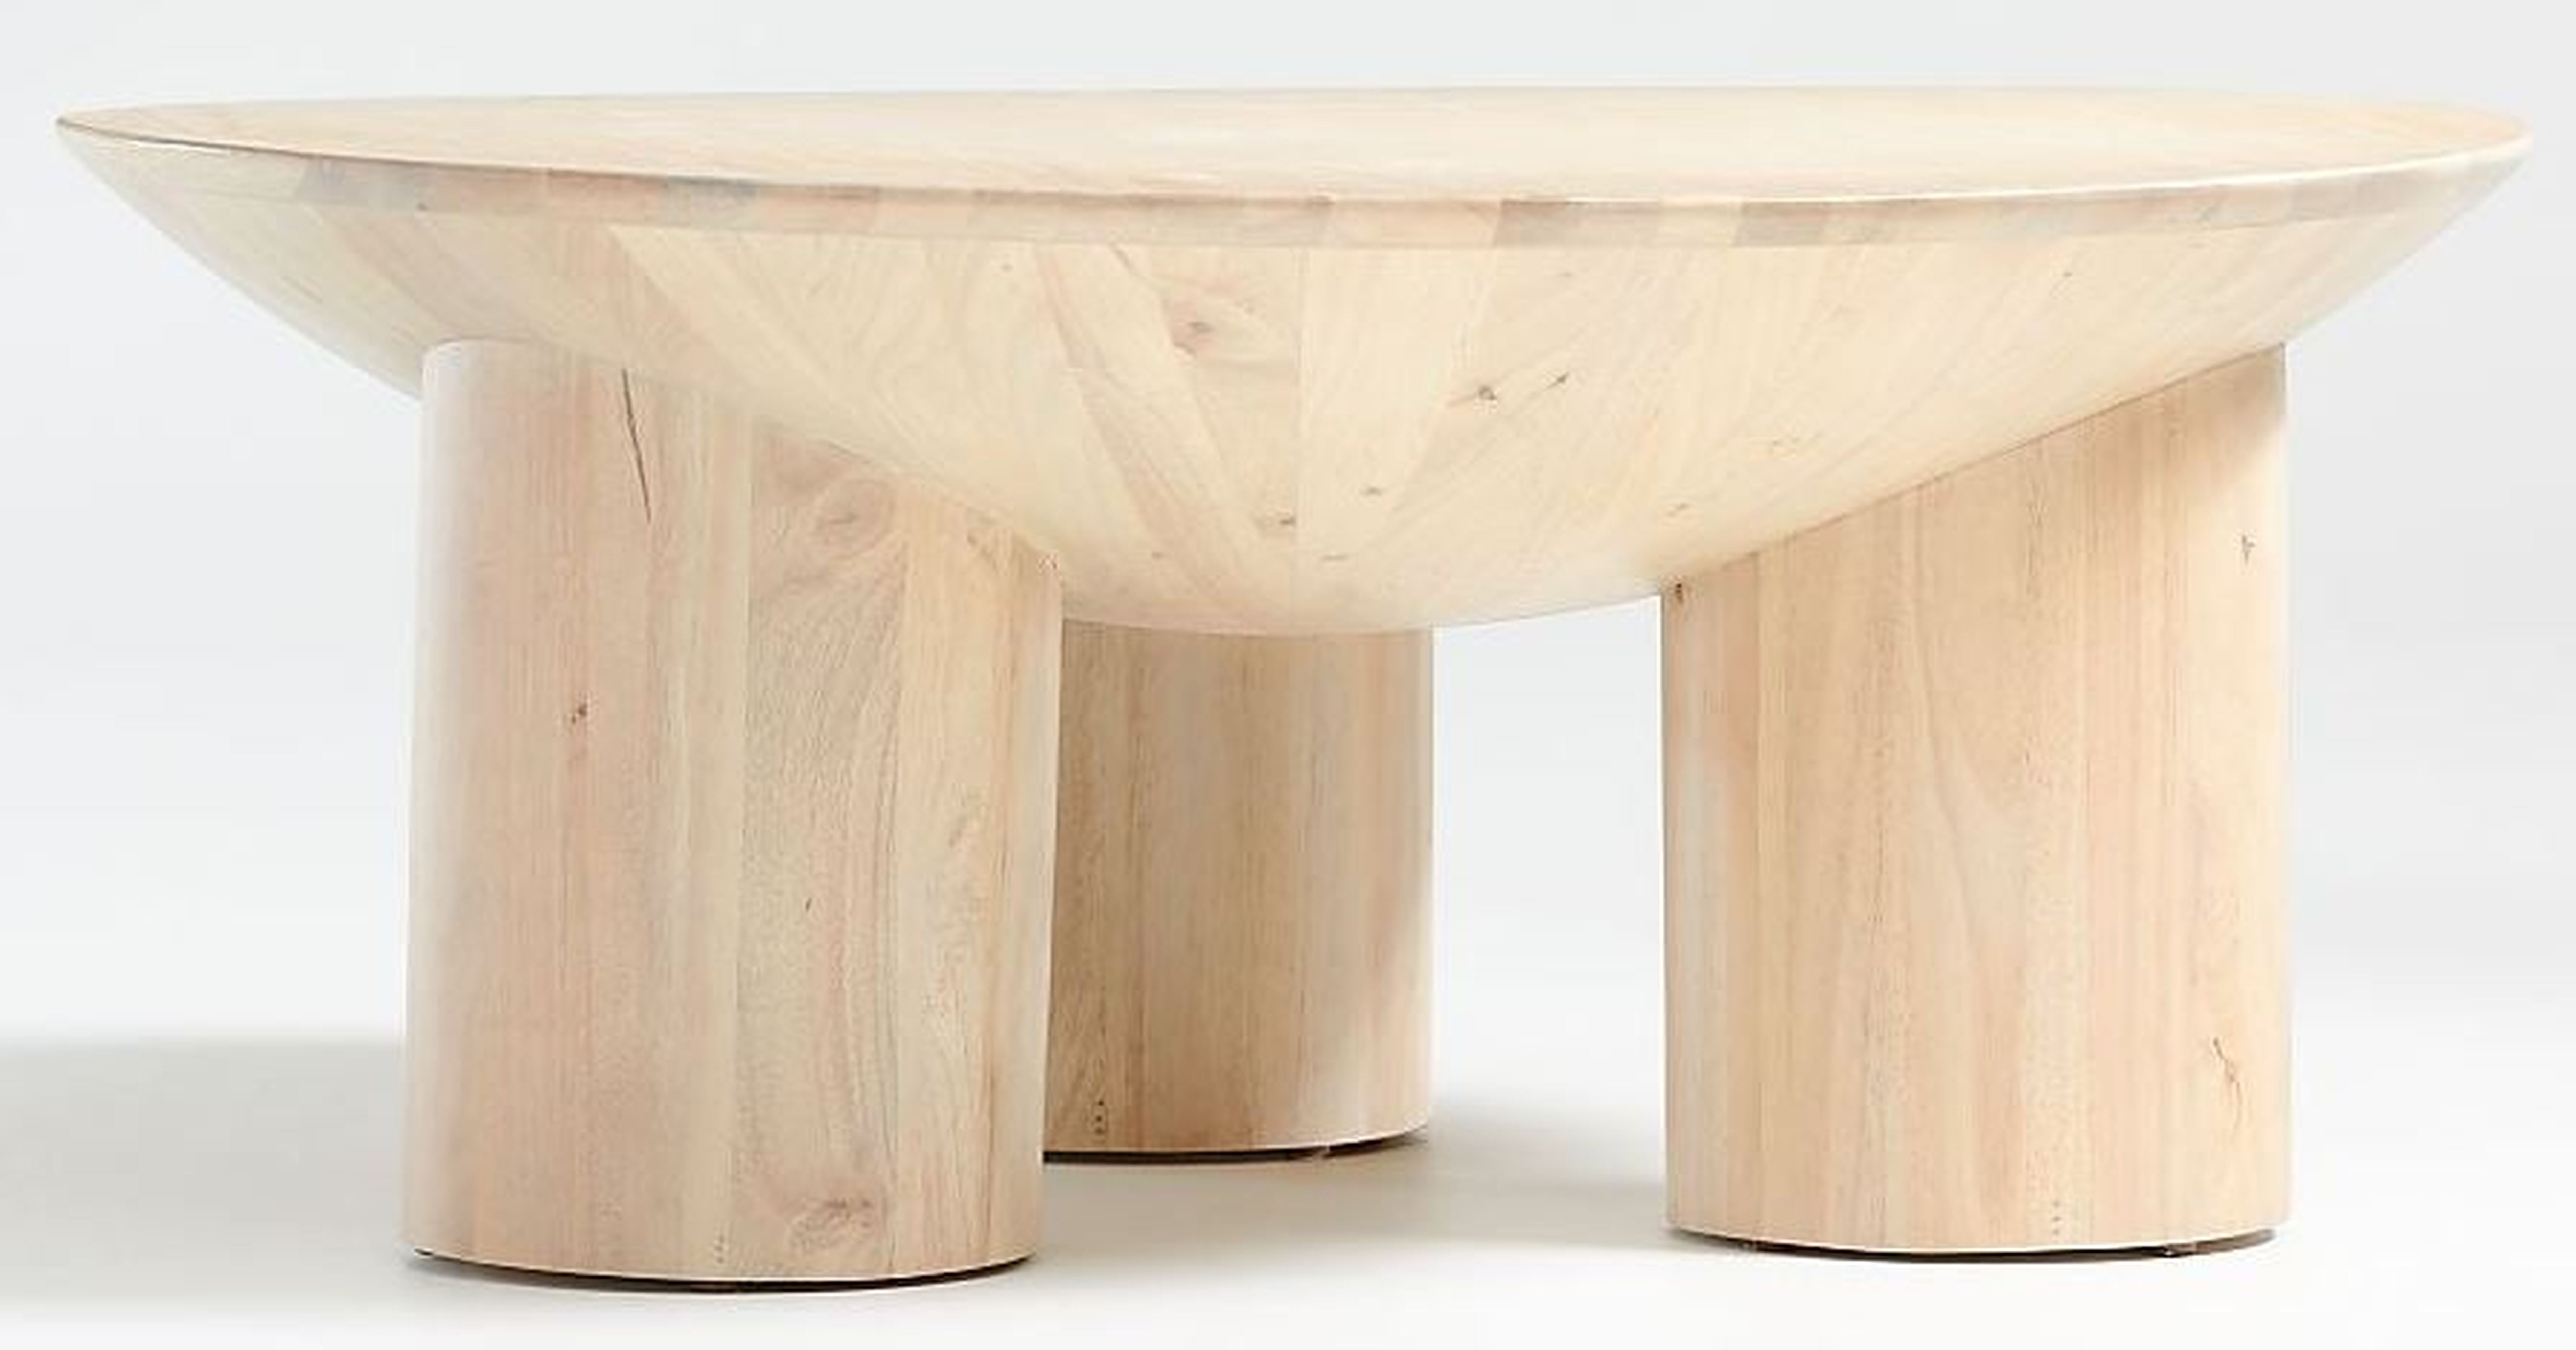 Tom Natural White Oak Wood 40" Round Three-Legged Coffee Table by Leanne Ford - Crate and Barrel